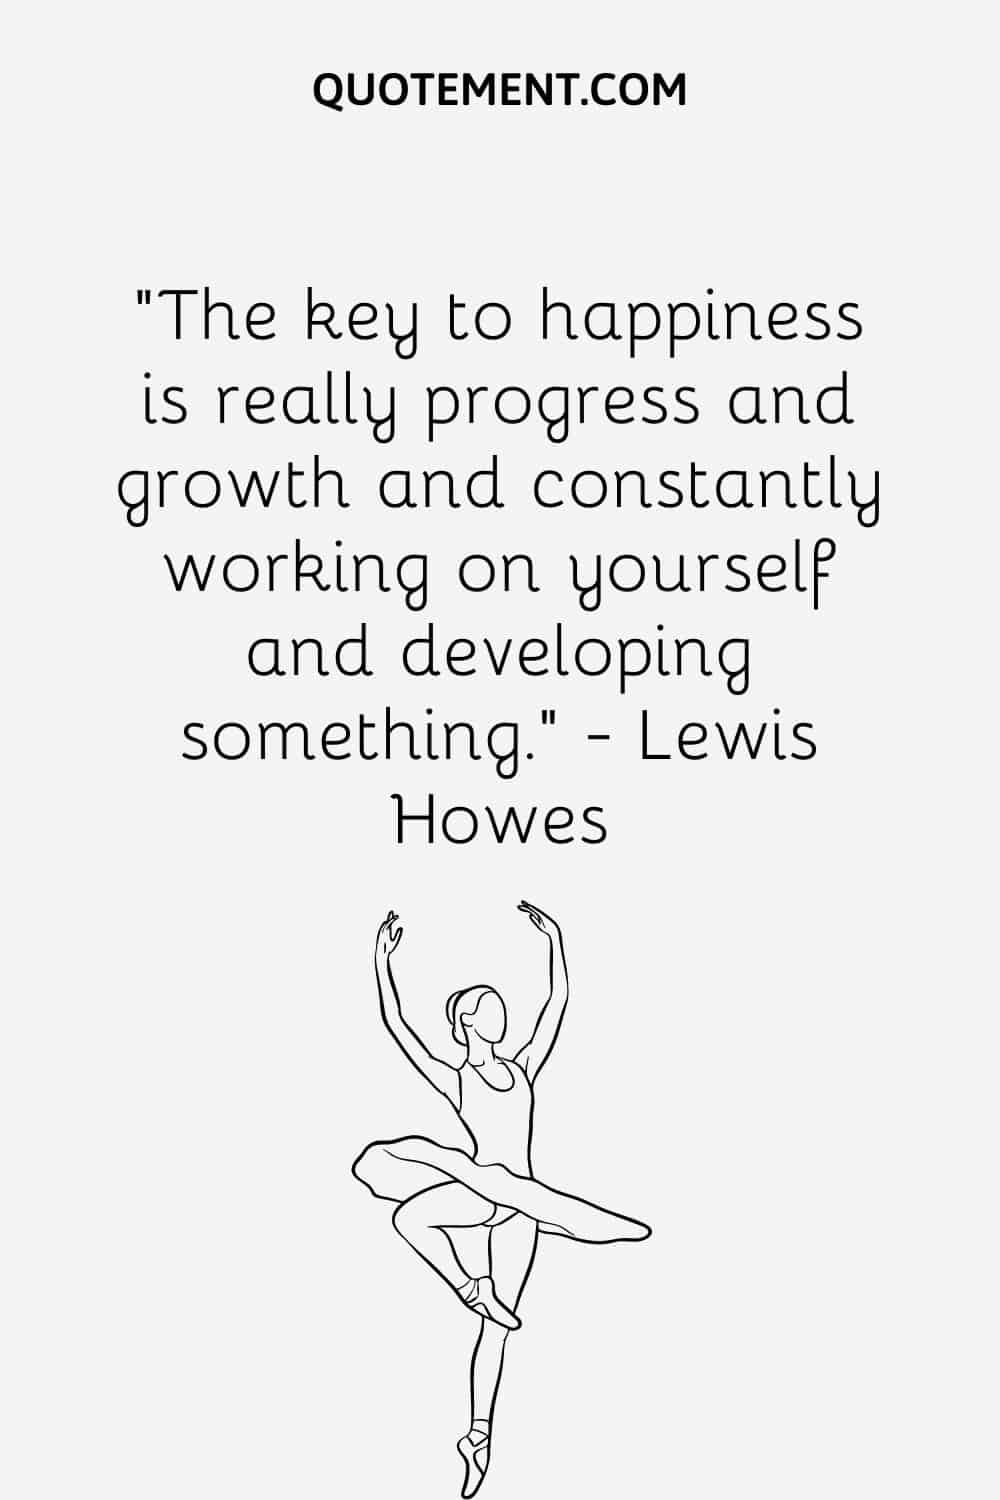 The key to happiness is really progress and growth and constantly working on yourself and developing something